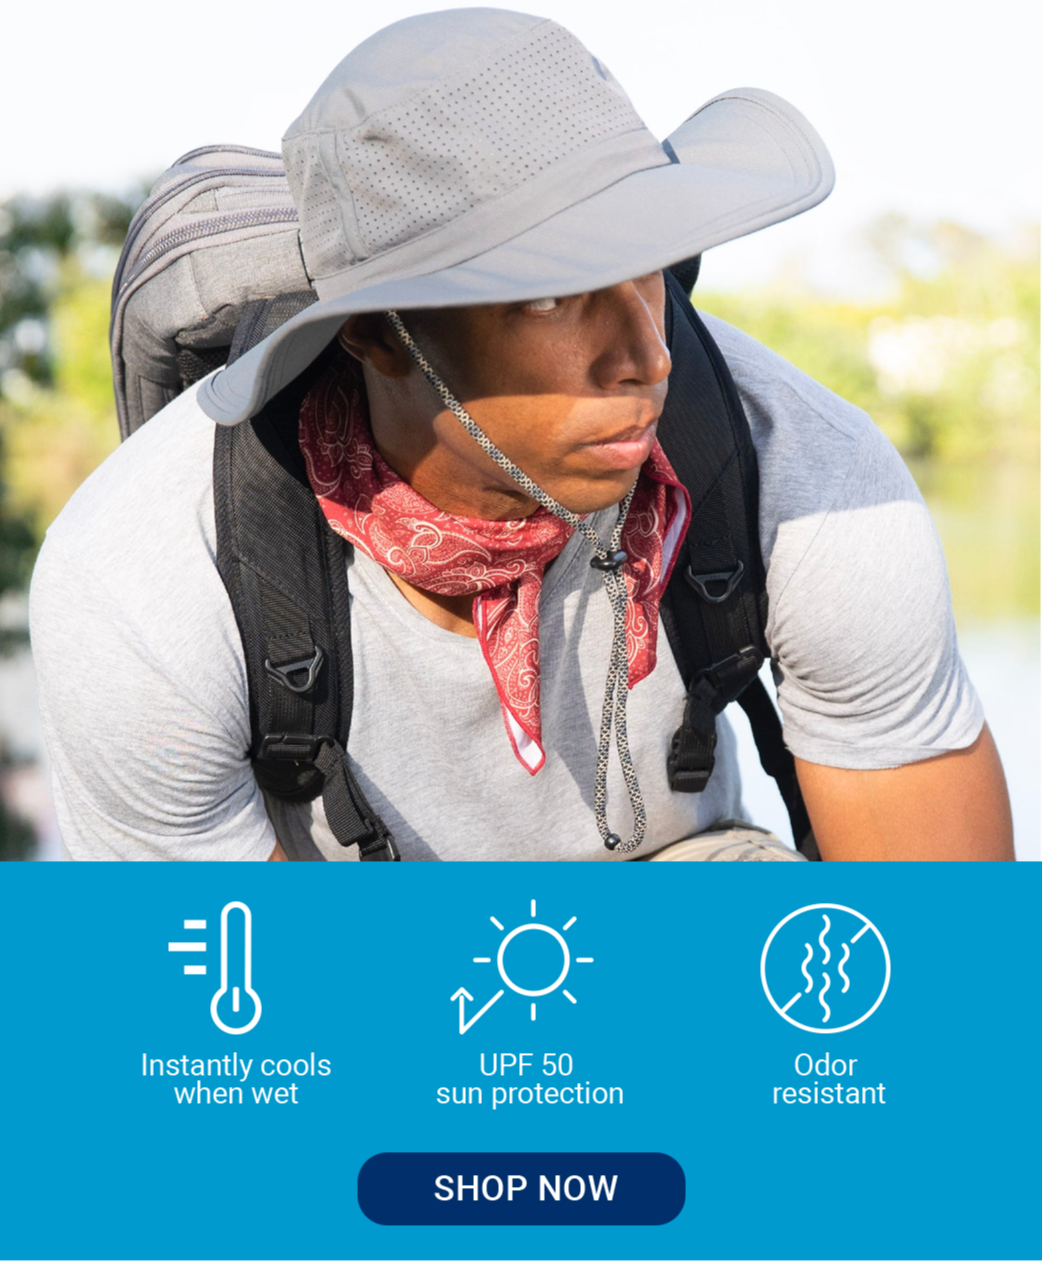 Instantly cools when wet UPF 50 sun protection Odor resistant [SHOP NOW]